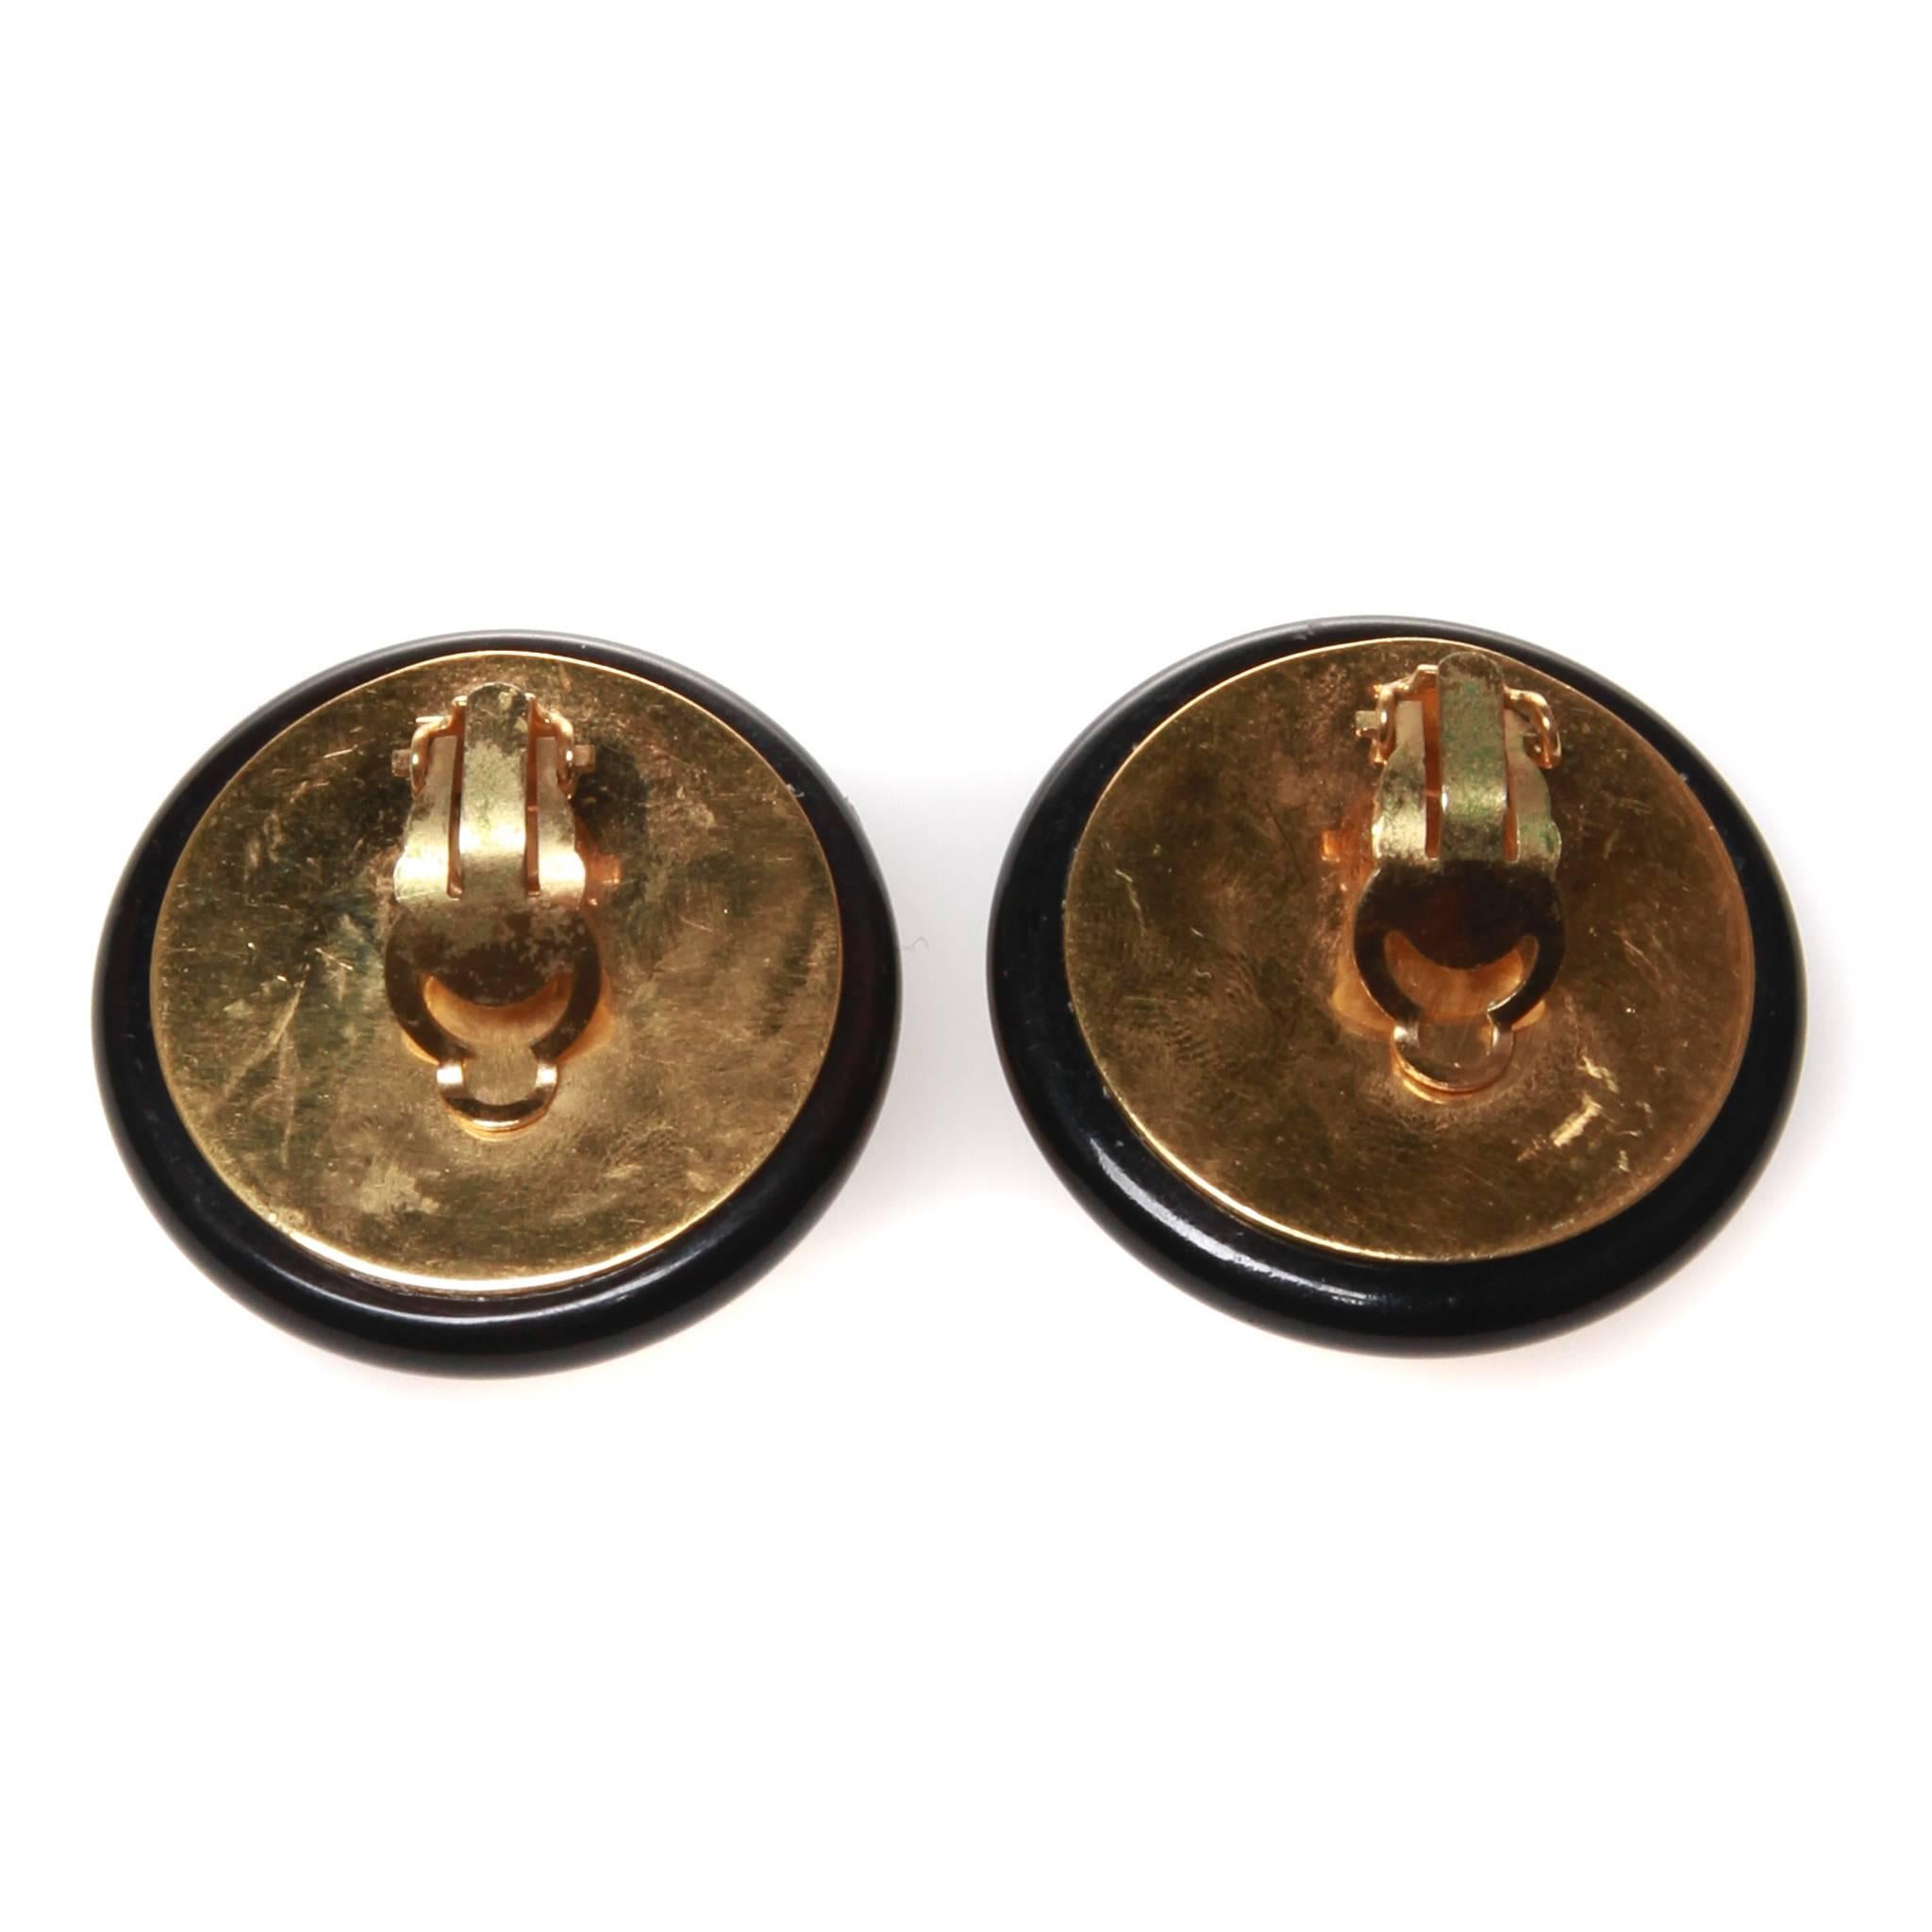 Vintage Chanel clip-on earrings featuring the interlocking CC against knit-look gold tone metal and black resin. 